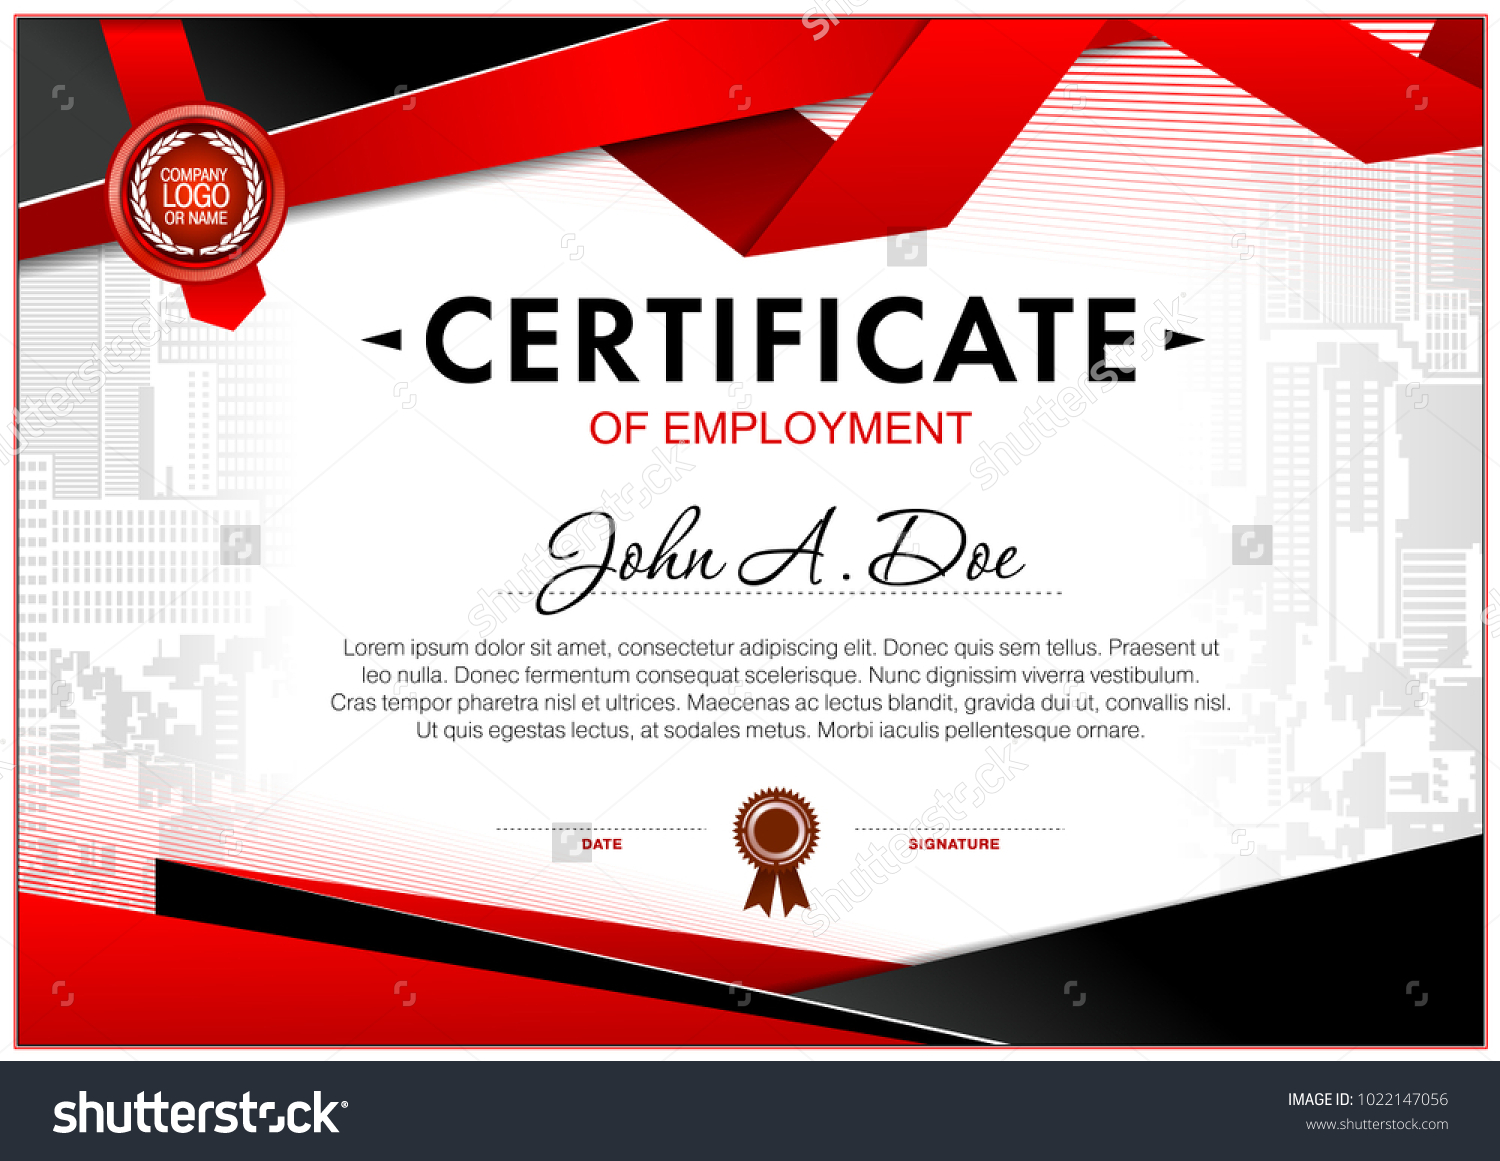 Certificate Employment Template Geometrical Simple Shapes Stock With Regard To Certificate Of Employment Template